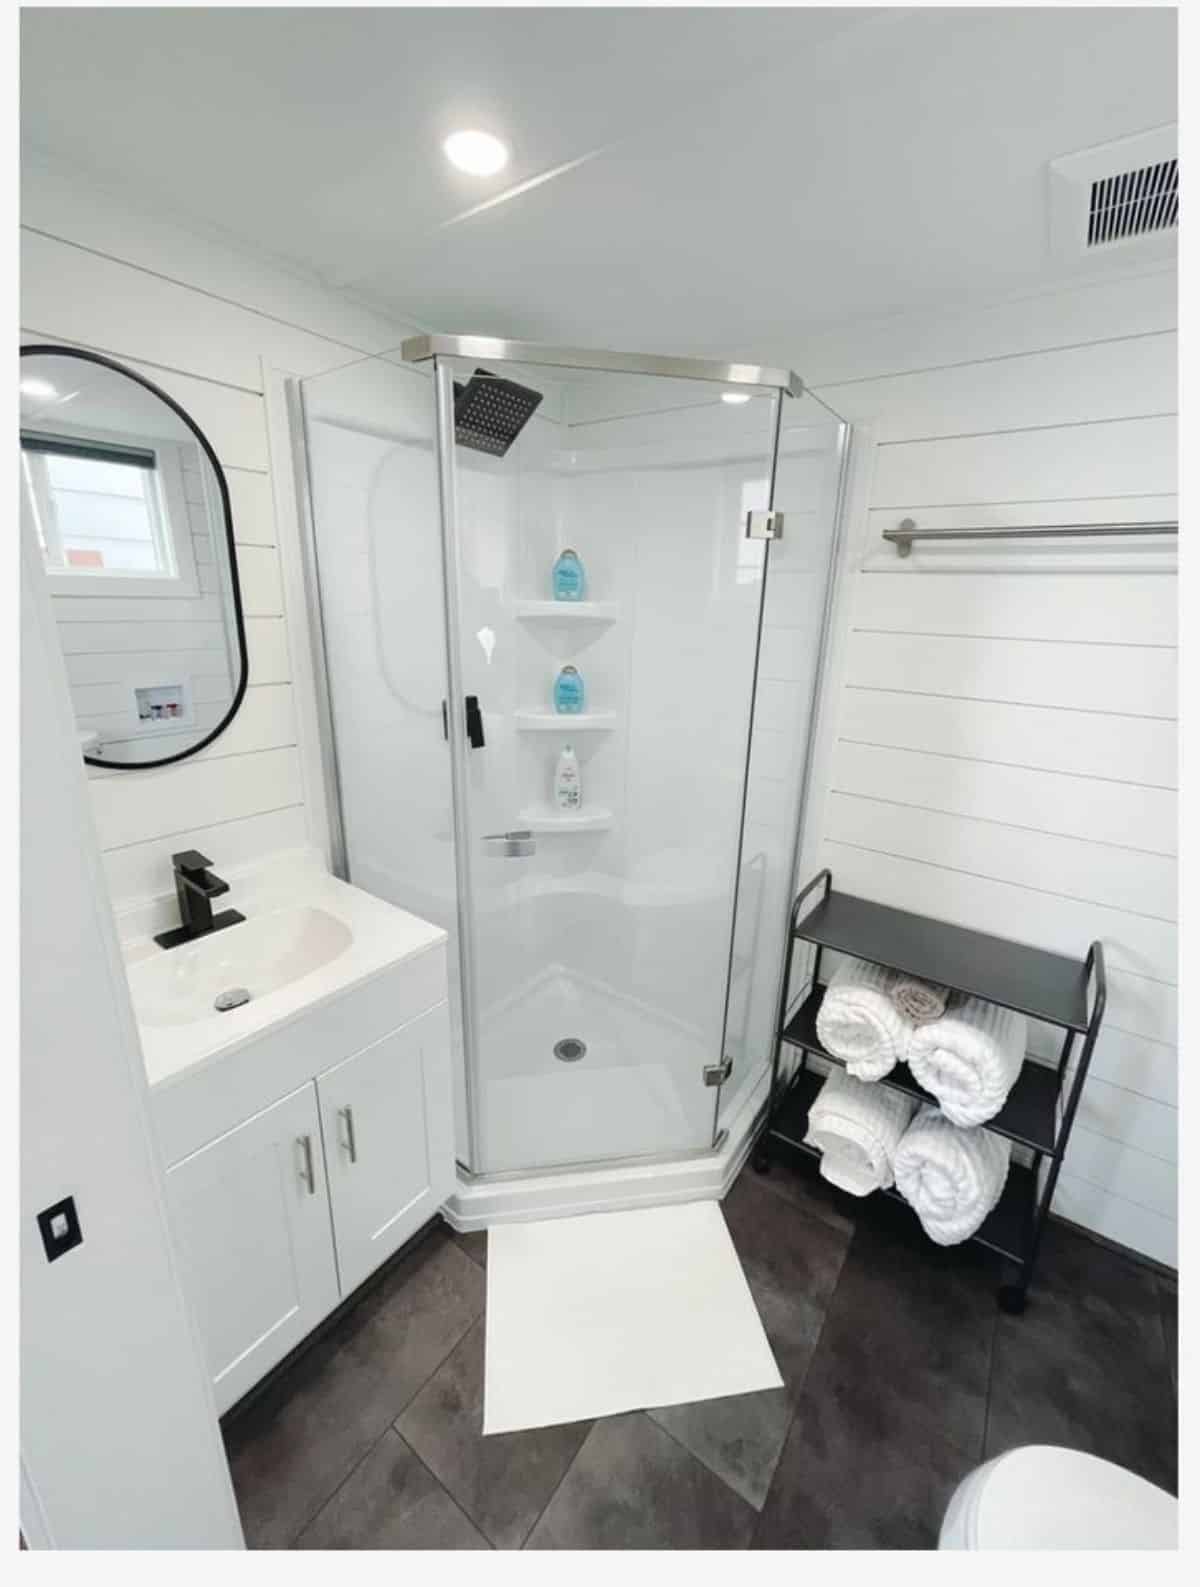 Shower cubical , sink with vanity and mirror in bathroom